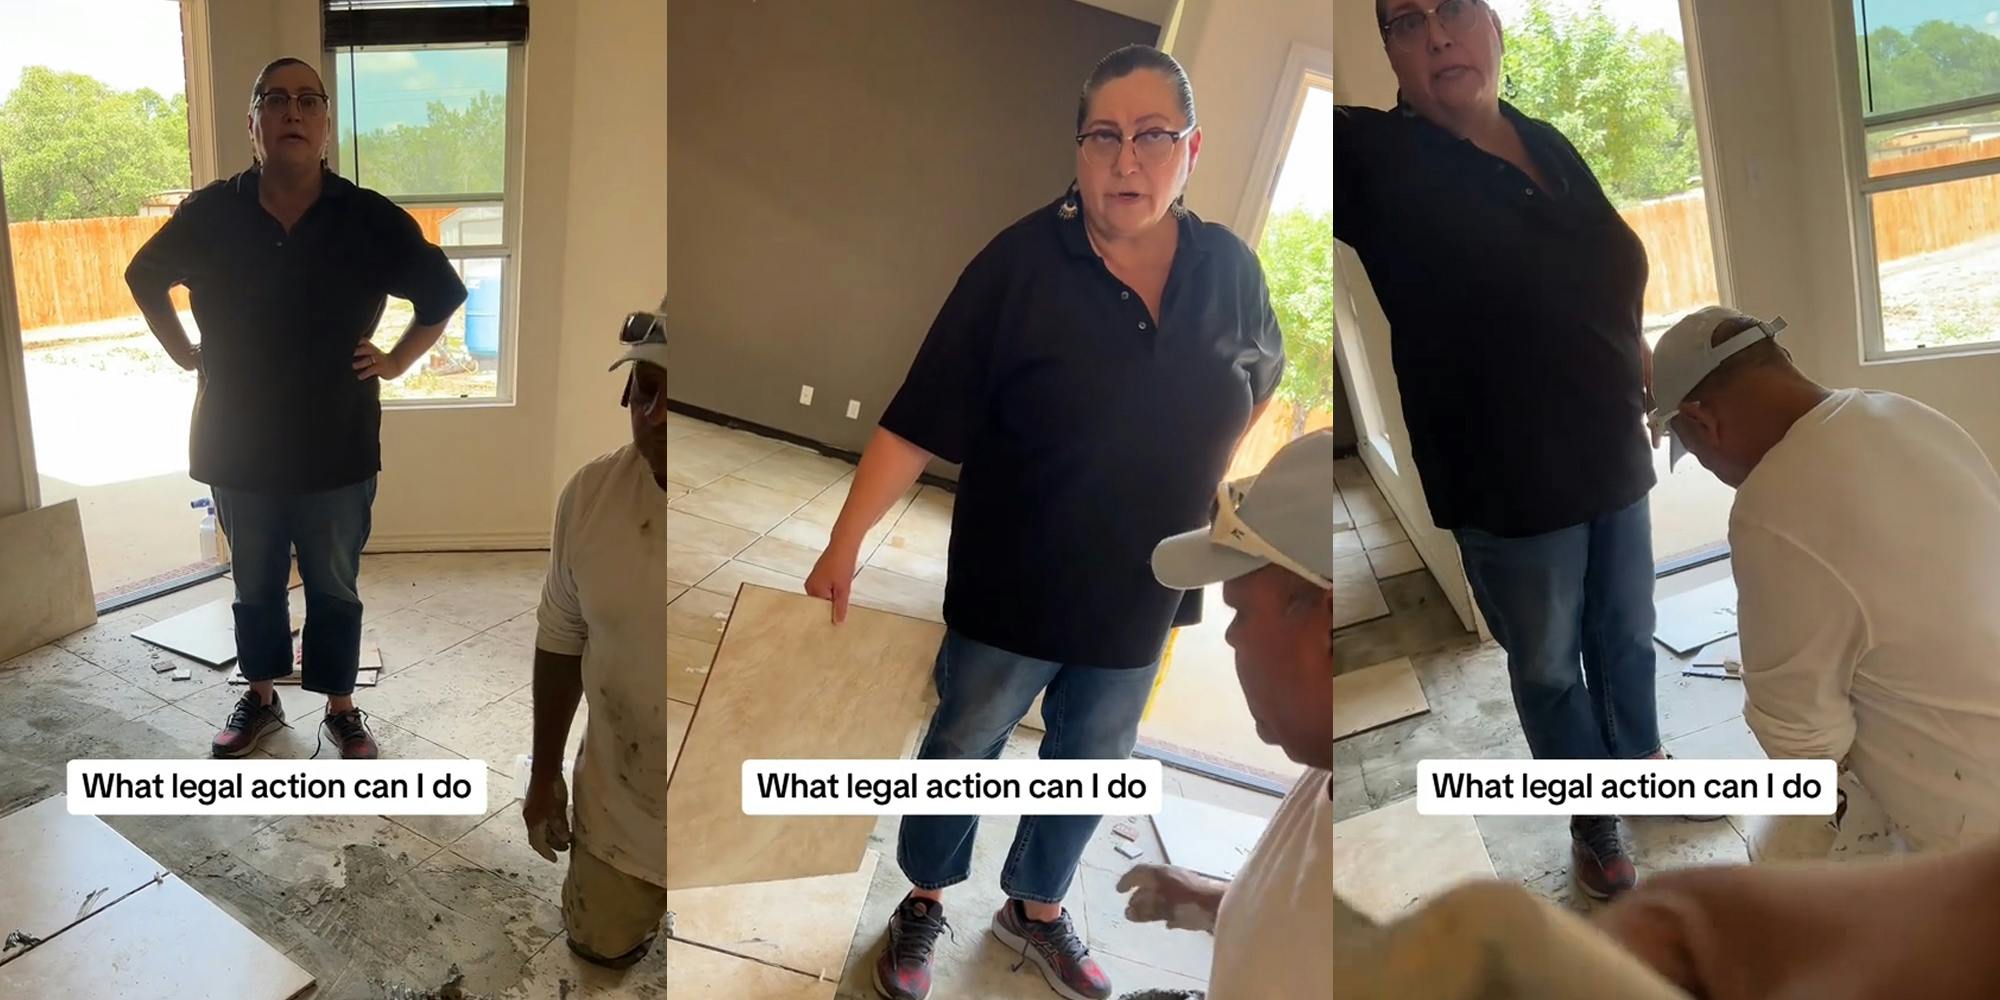 home owner speaking to workers in kitchen with caption "What legal action can I do" (l) home owner speaking to workers in kitchen with caption "What legal action can I do" (c) home owner speaking to workers in kitchen with caption "What legal action can I do" (r)